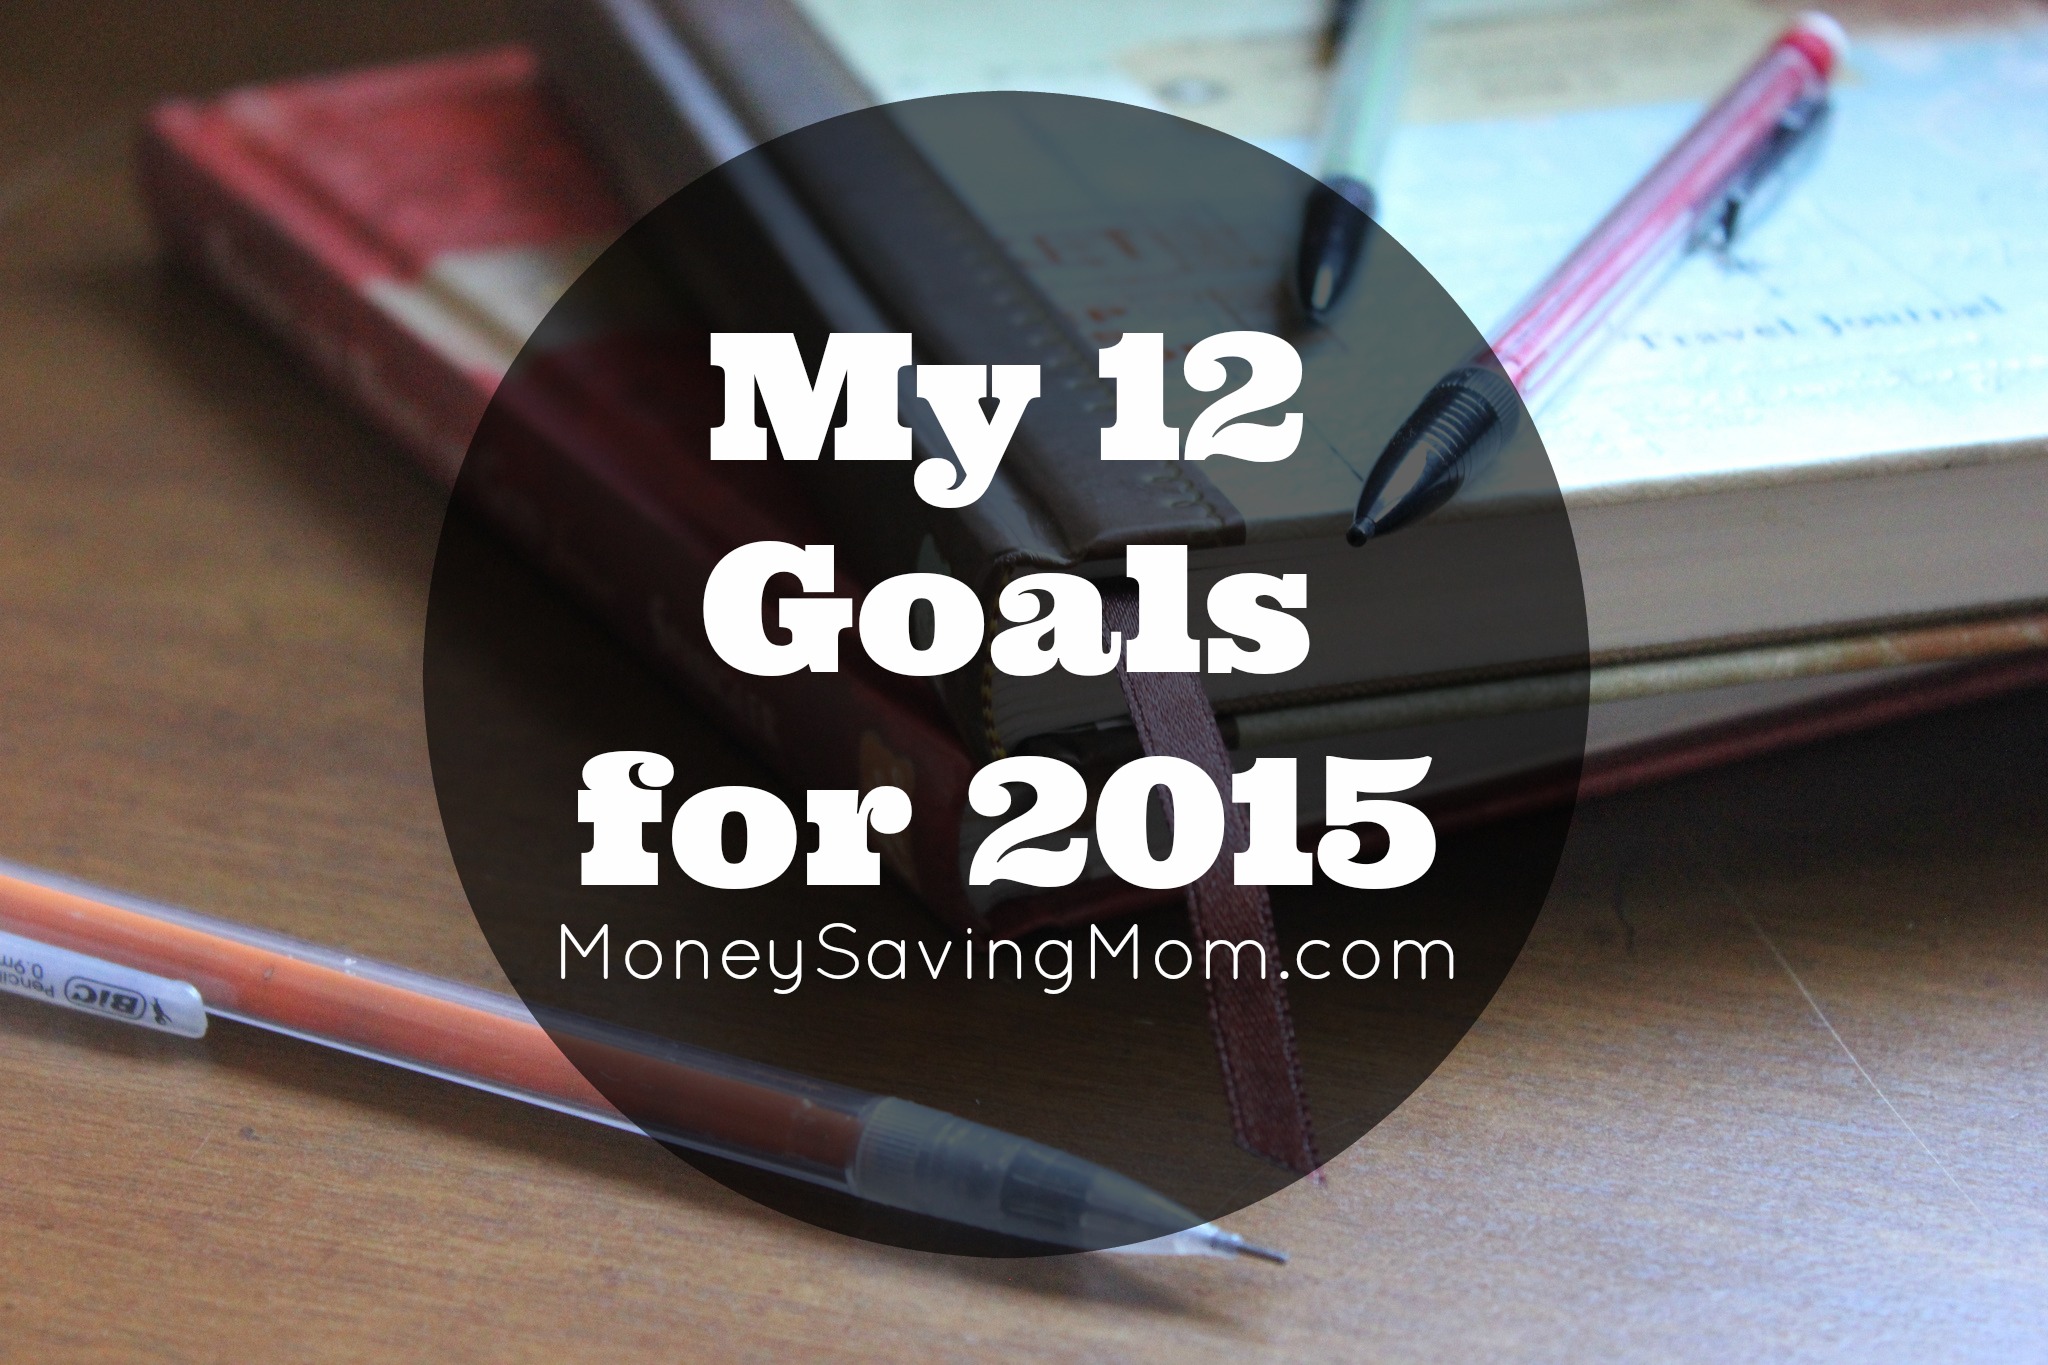 My 12 Goals for 2015